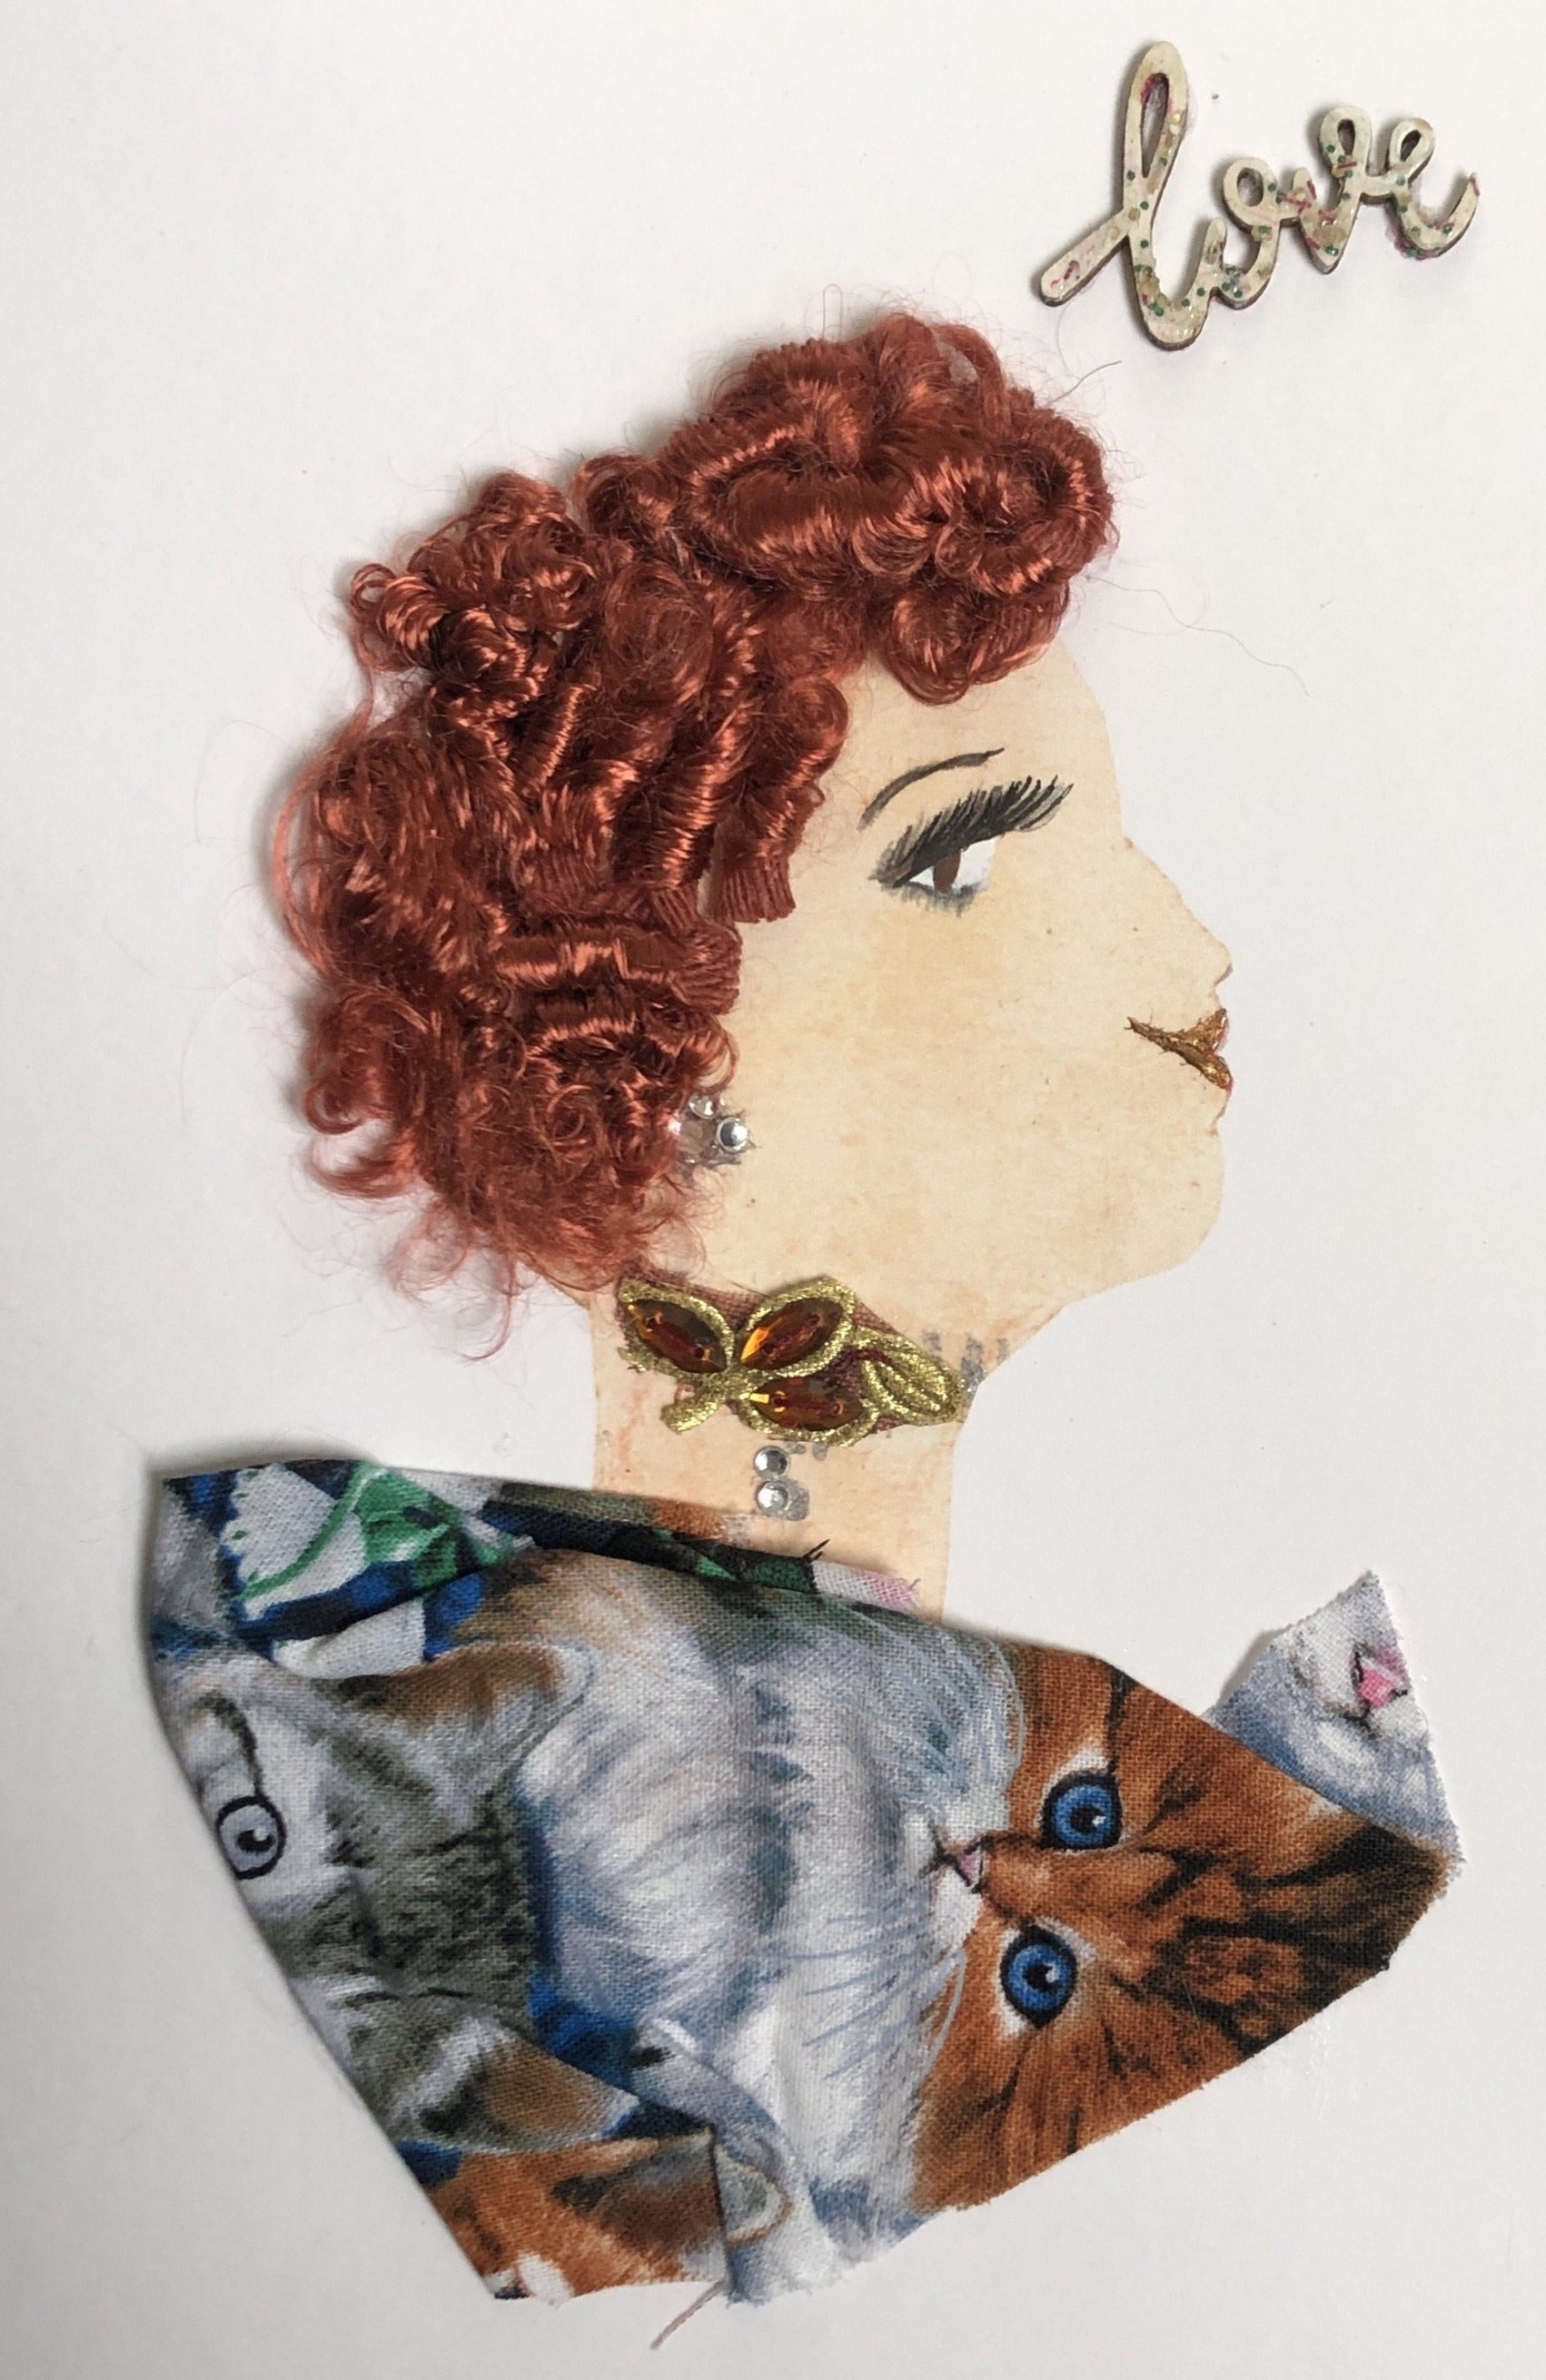 This card is of a woman given the name Catford. Catford wears a cat-patterned fabric, a small leafy necklace, and her hair is short, red, and curly. In the background of the card, there is a sticker in the top right corner which says "love"  